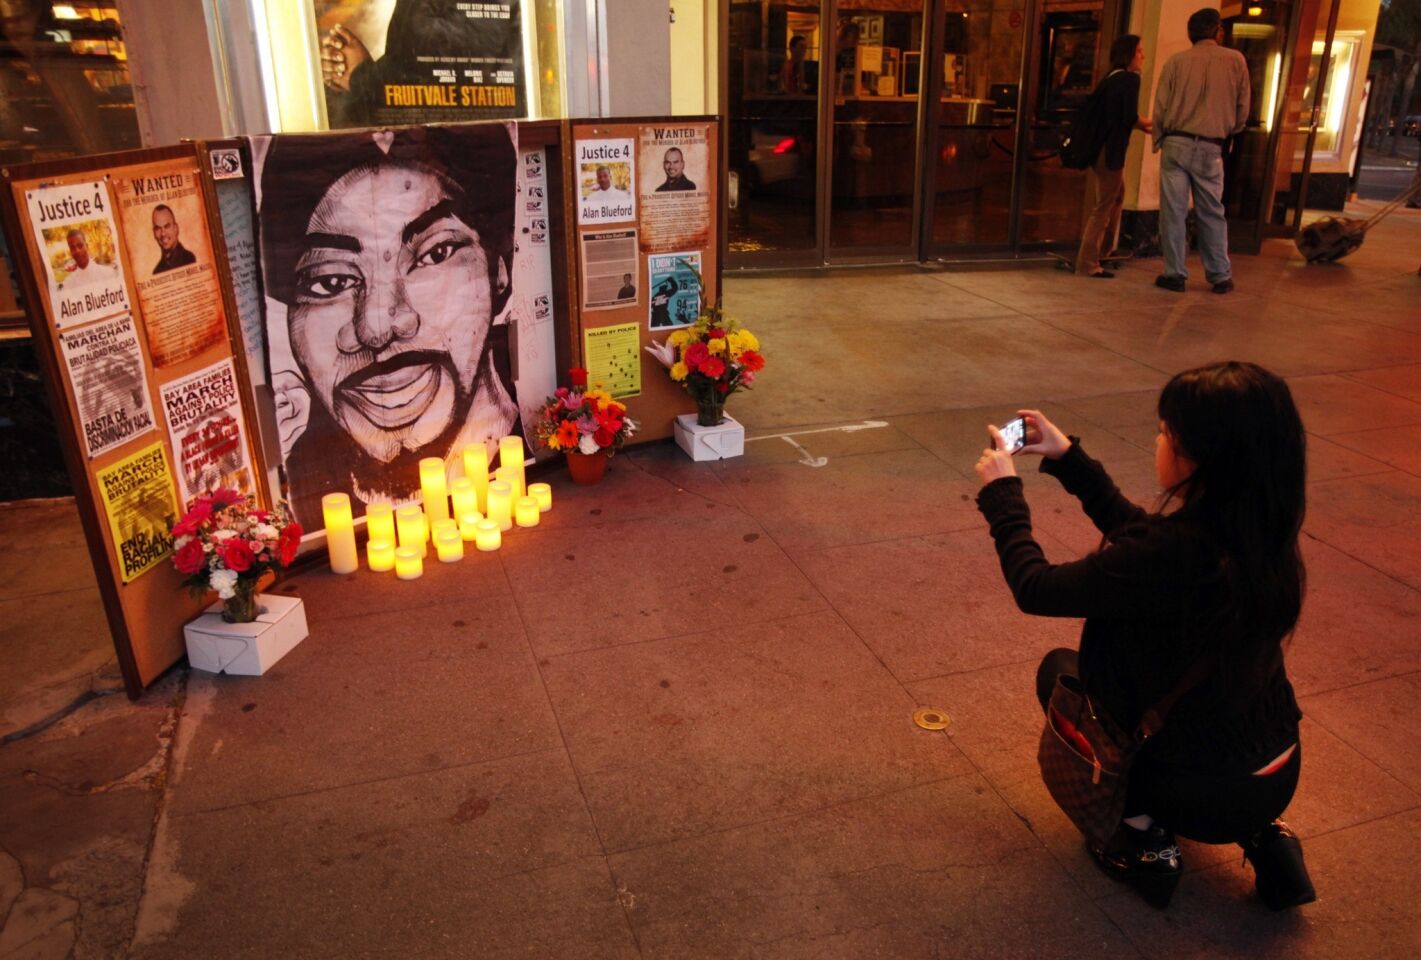 Malia Nguon takes a photo of a memorial to Oscar Grant at the Grand Lake Theatre on the night of the "Fruitvale Station" premiere.